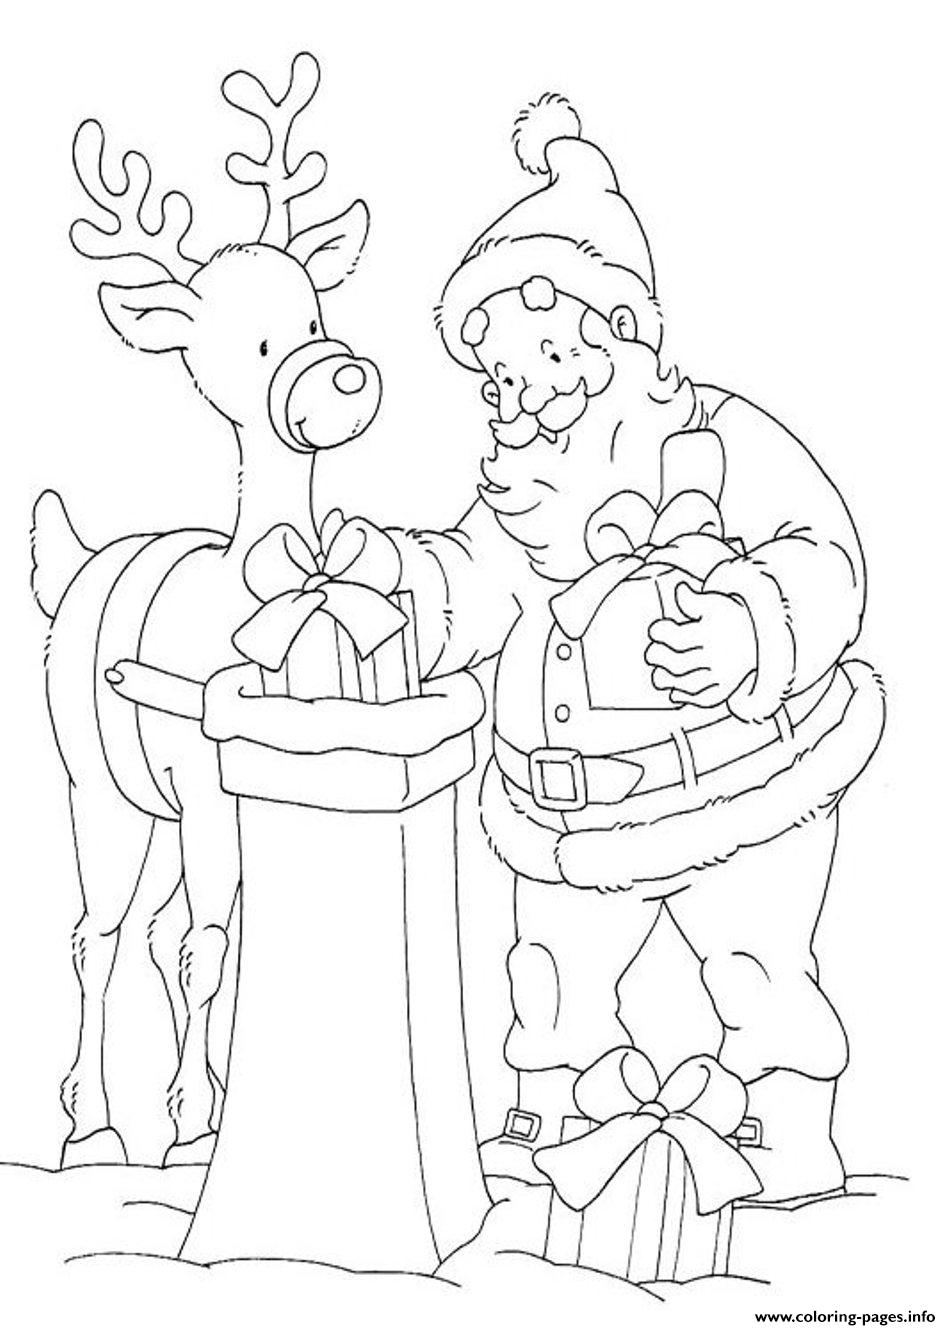 Coloring Pages Of Santa Claus Delivering Presents Into A Pit7878 coloring